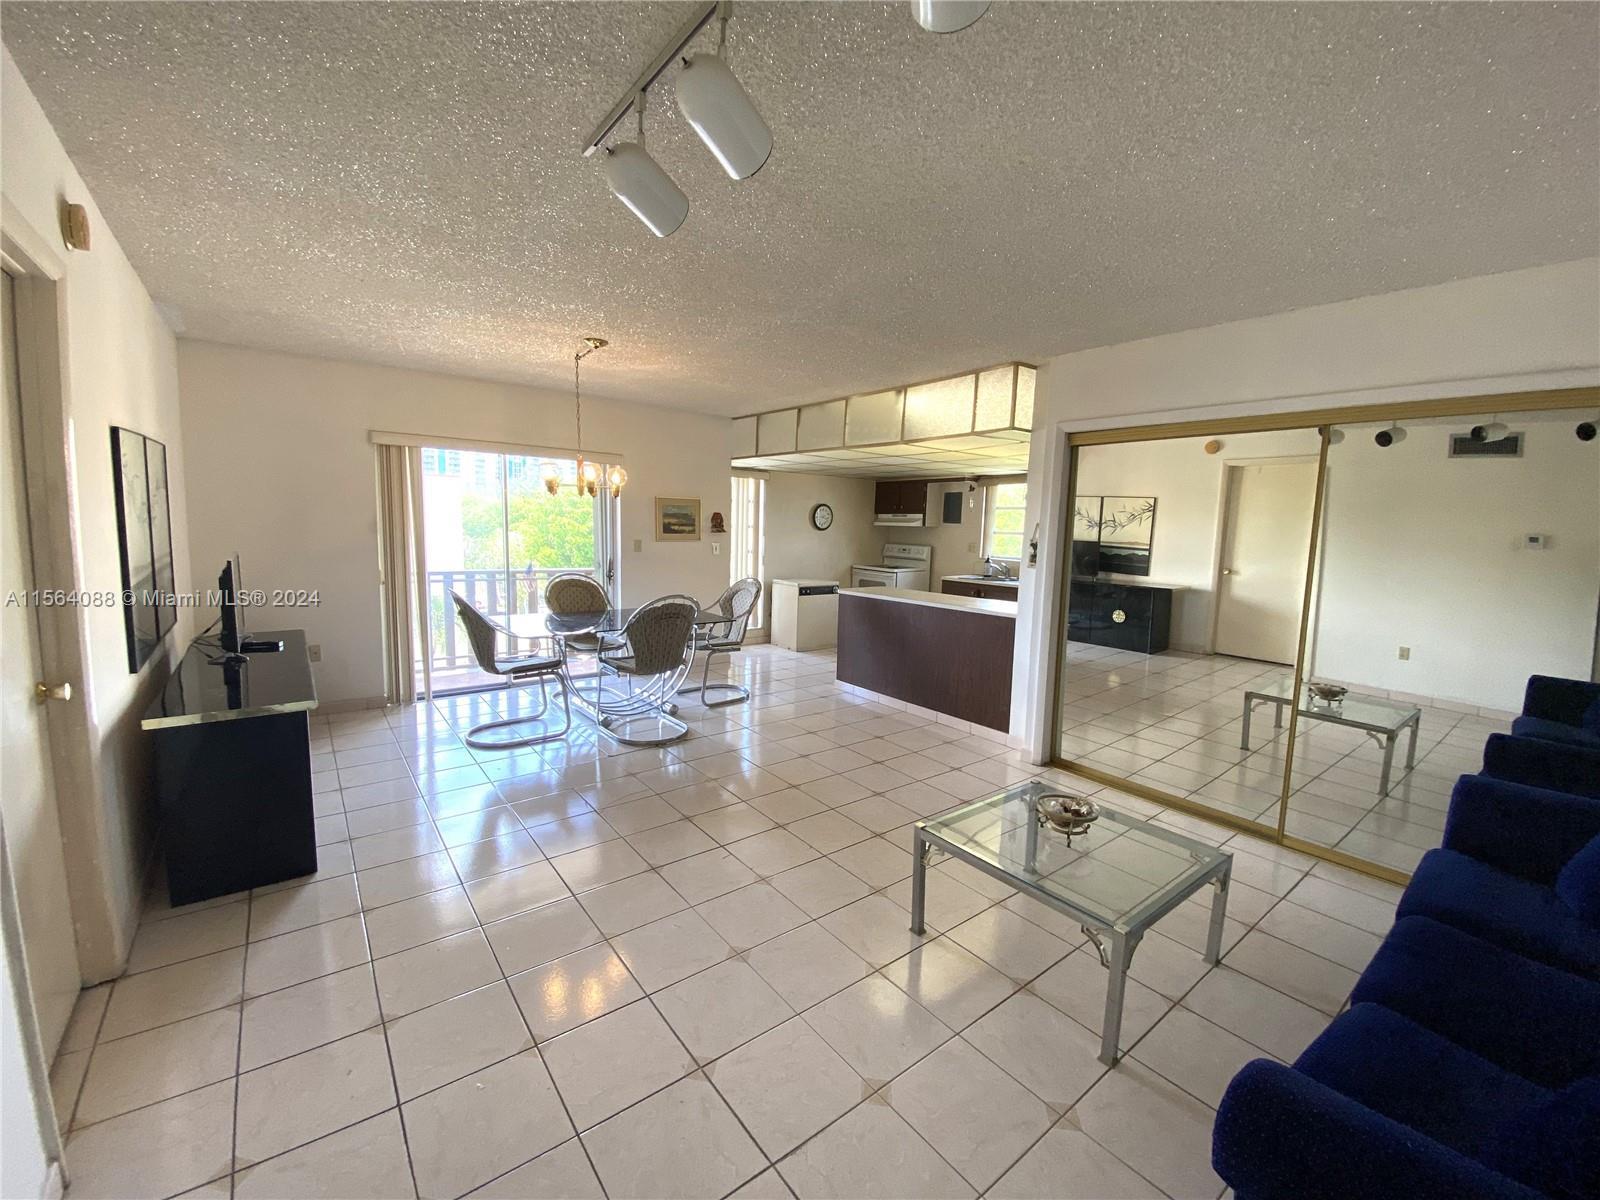 Photo of 4715 NW 7th St #405-2 in Miami, FL